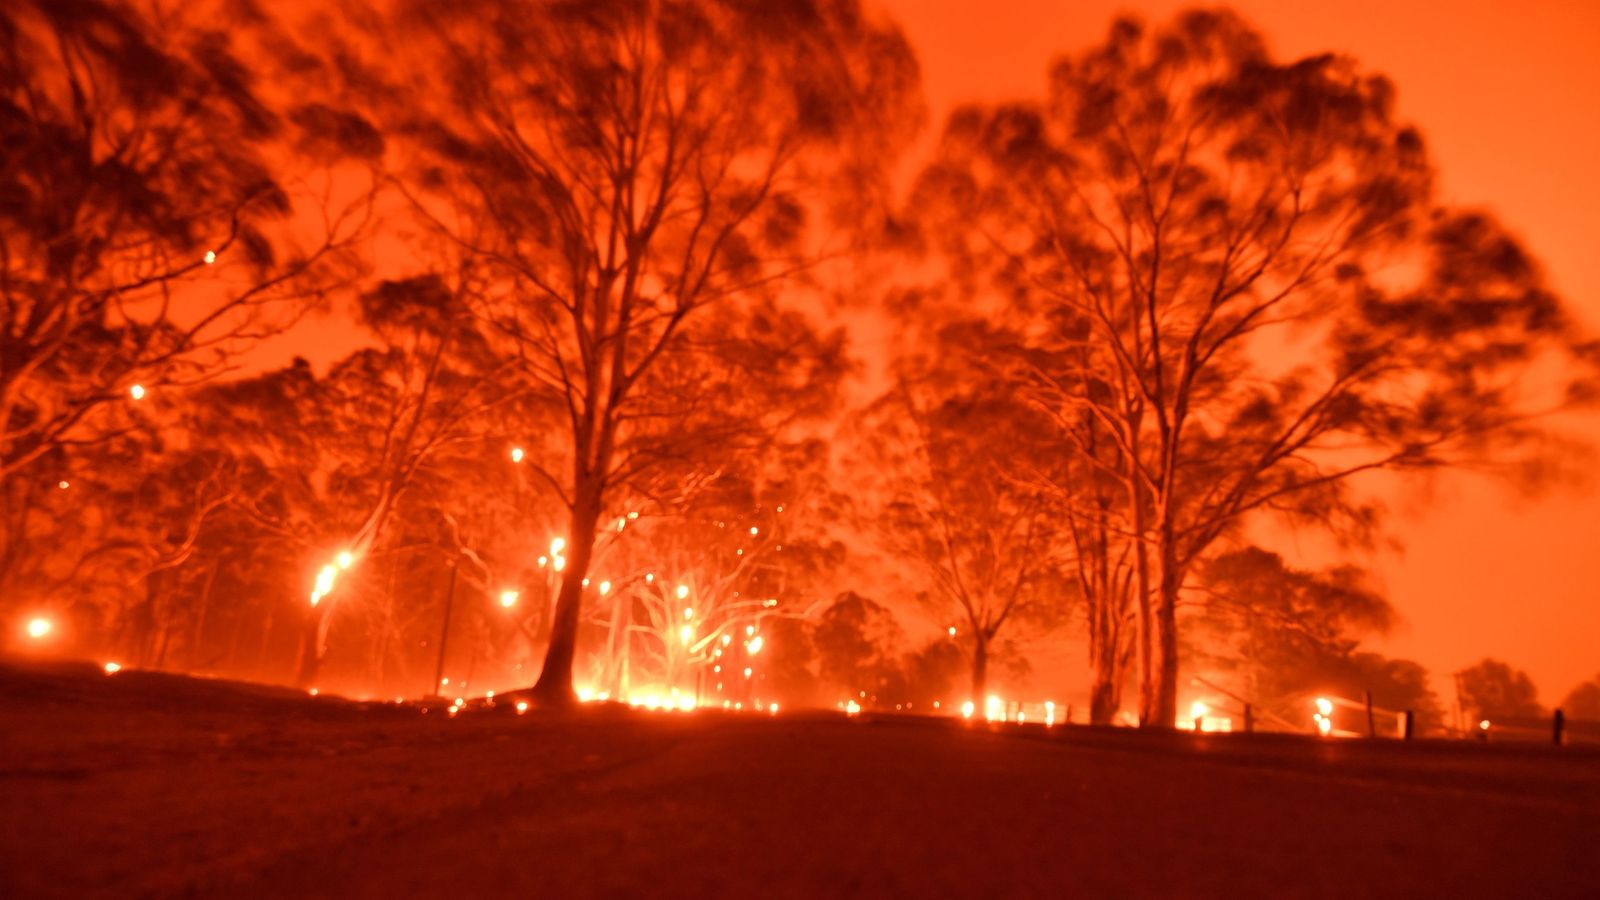 Bushfires must wake up Australia and the world to threat of climate change - Sky News